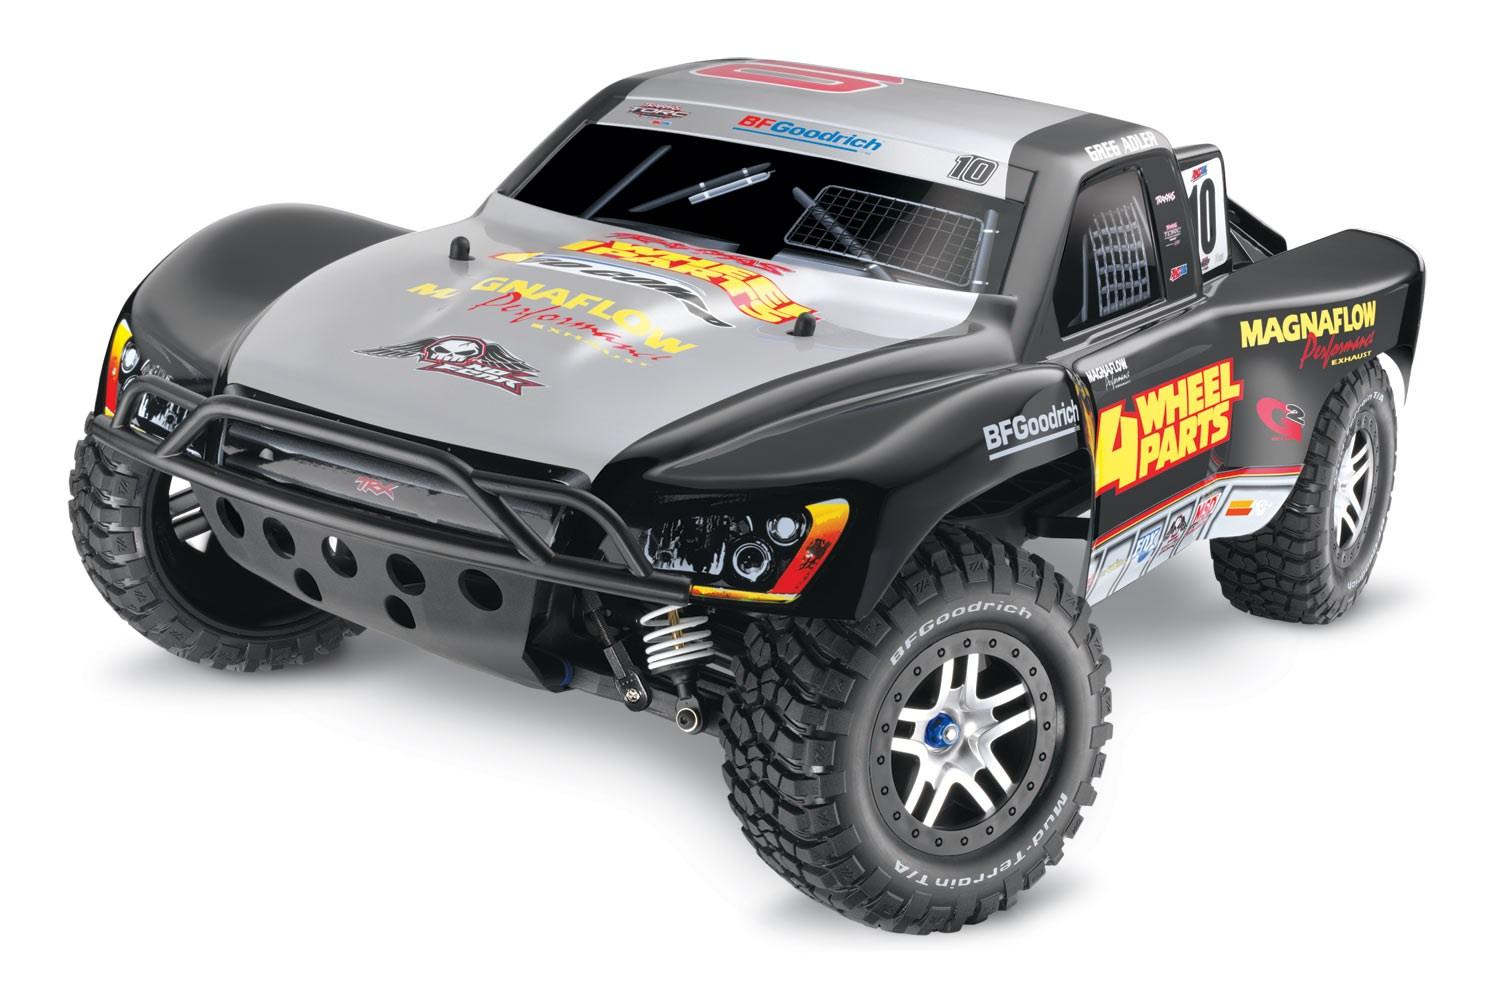 Foto Traxxas 6807 Slash Ultimate VXL Brushless 4WD 2.4GHz RTR modelismo coches rc (Gris) foto 438218